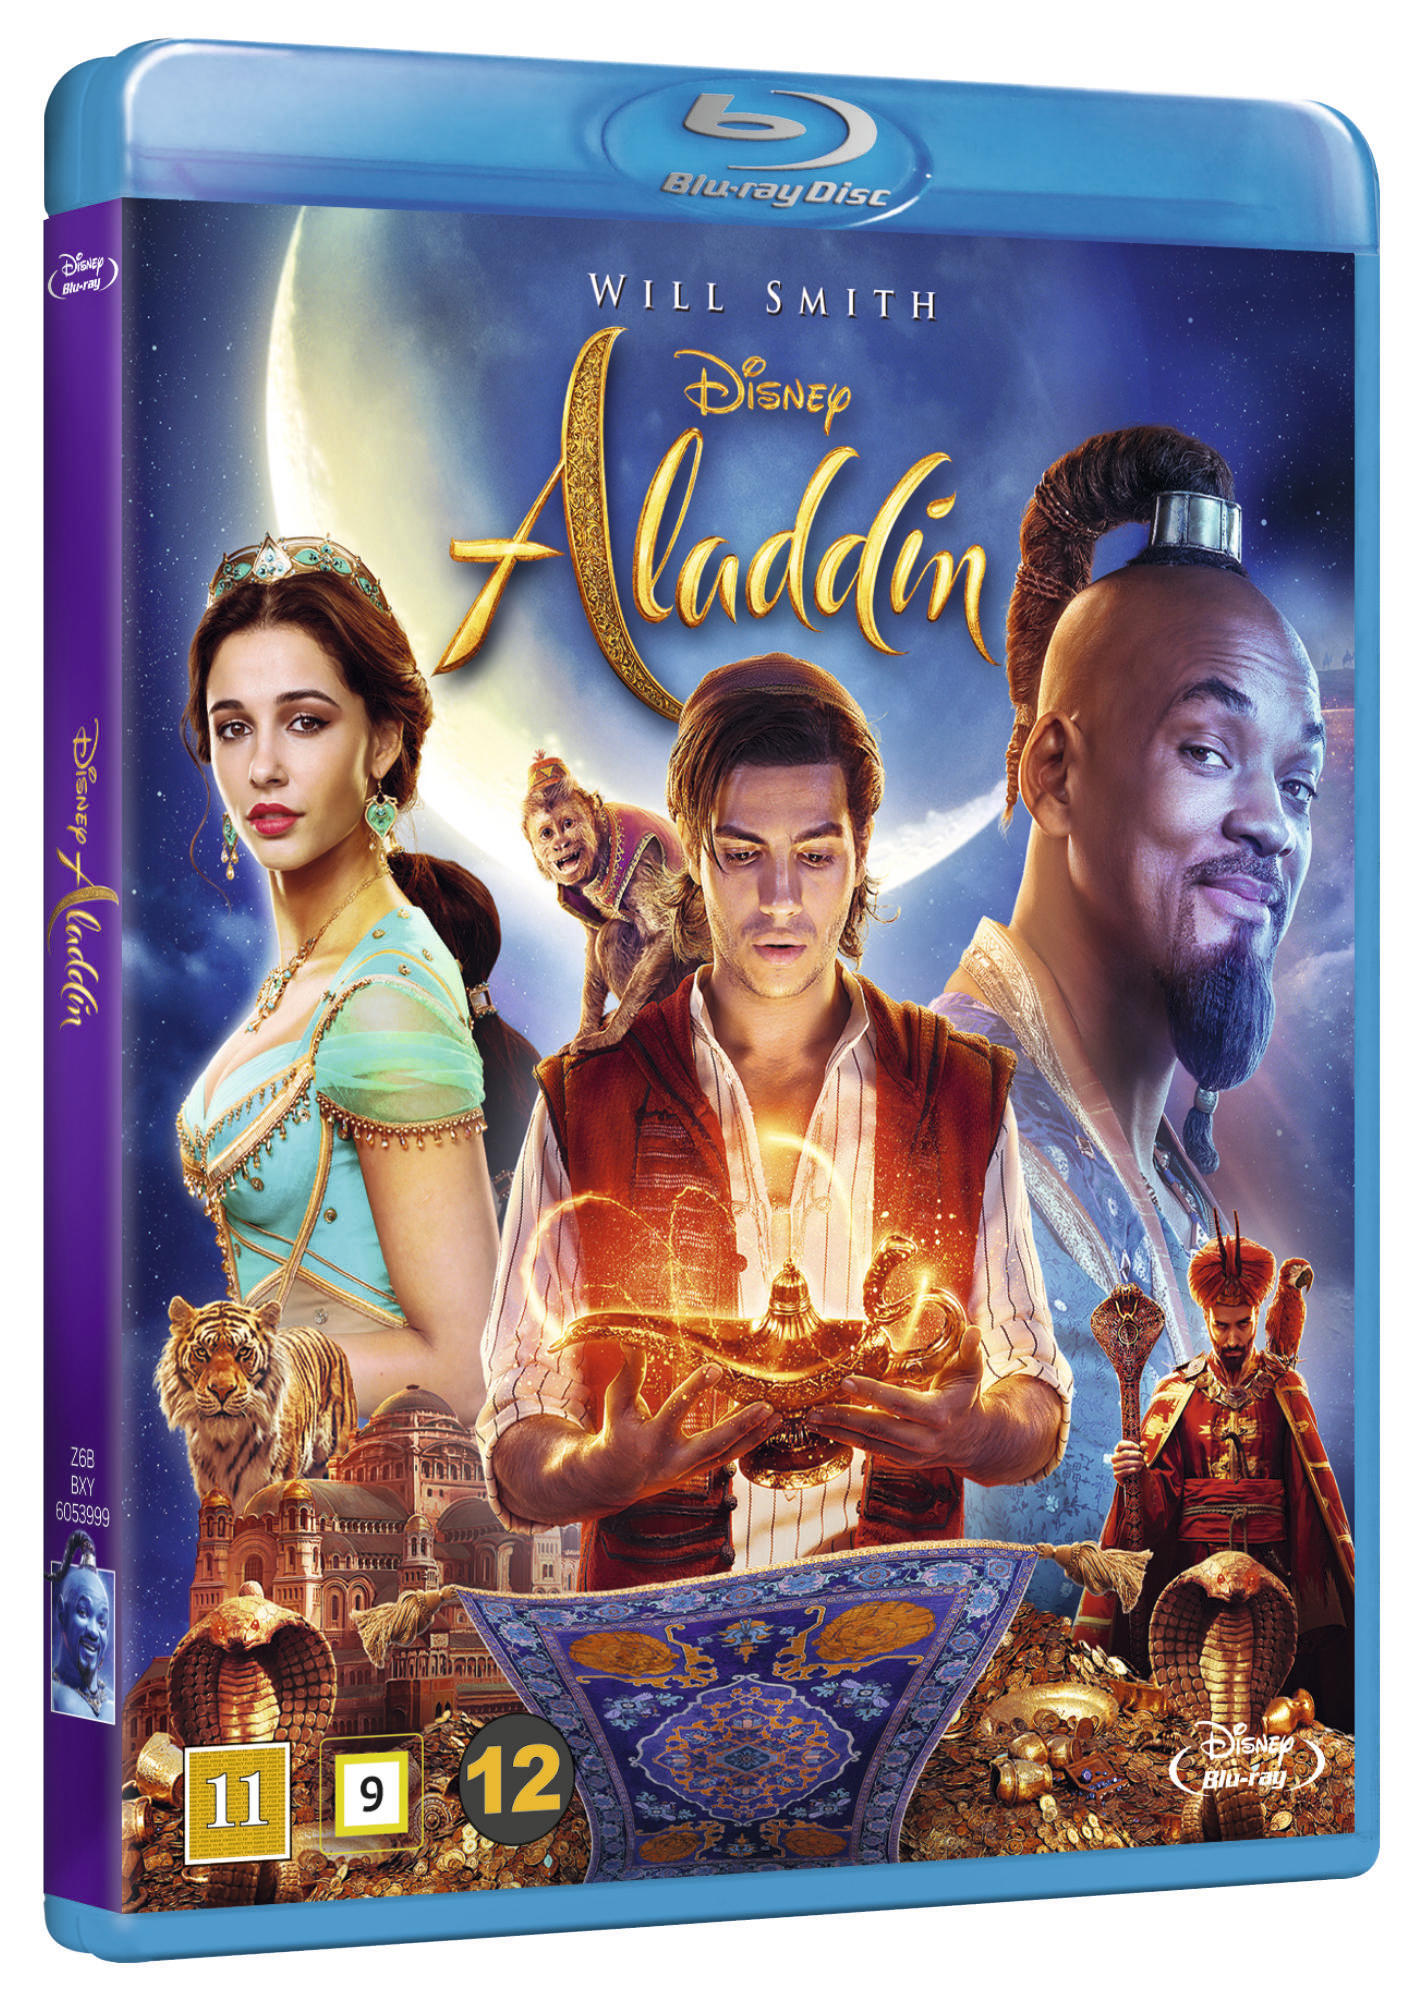 84 List Aladdin Movie 2019 Online Booking from Famous authors